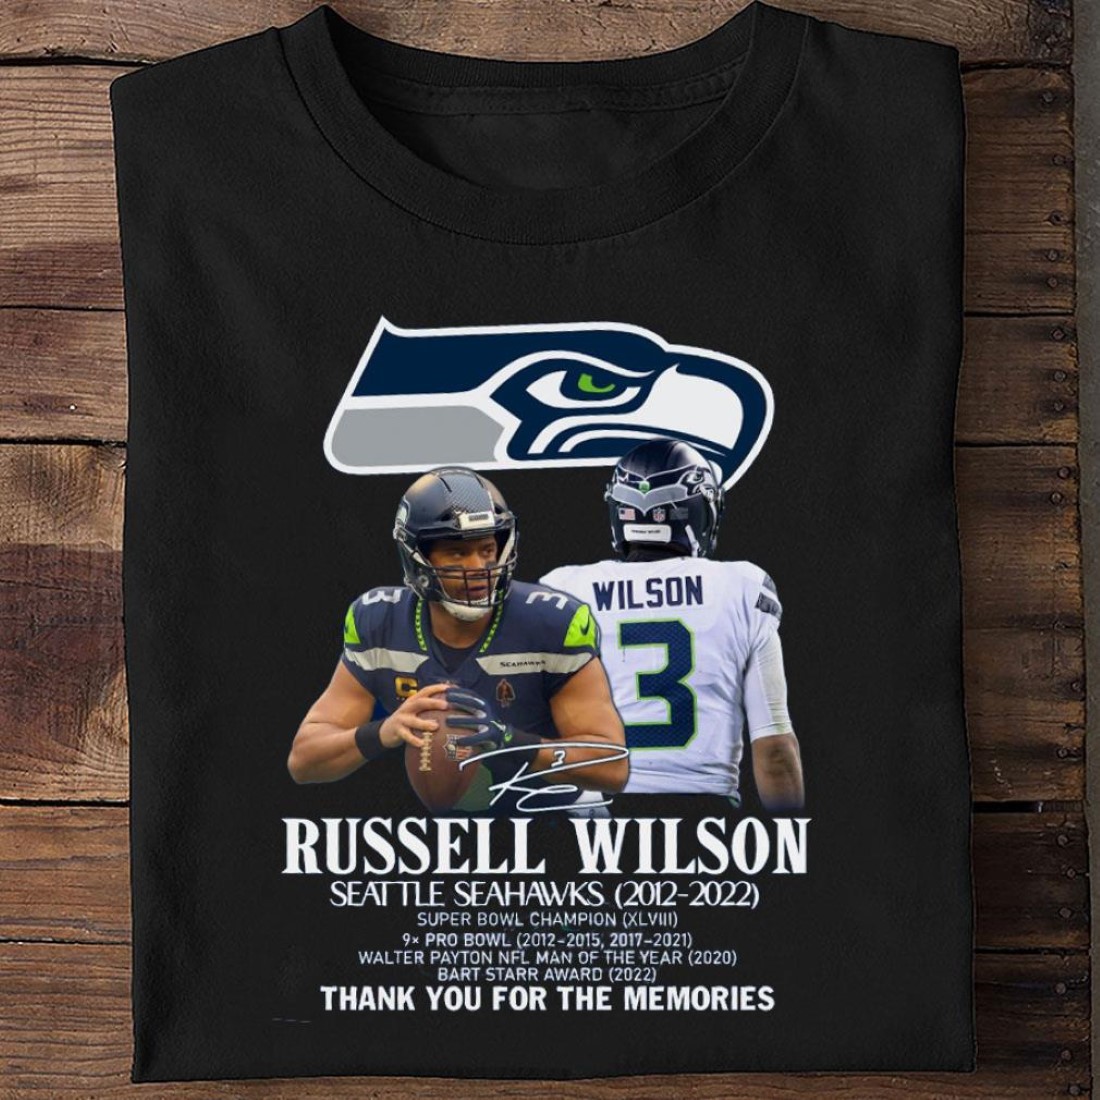 Russell Wilson Signed Seattle Seahawks 2012-2022 Thank You For The Memories Shirt